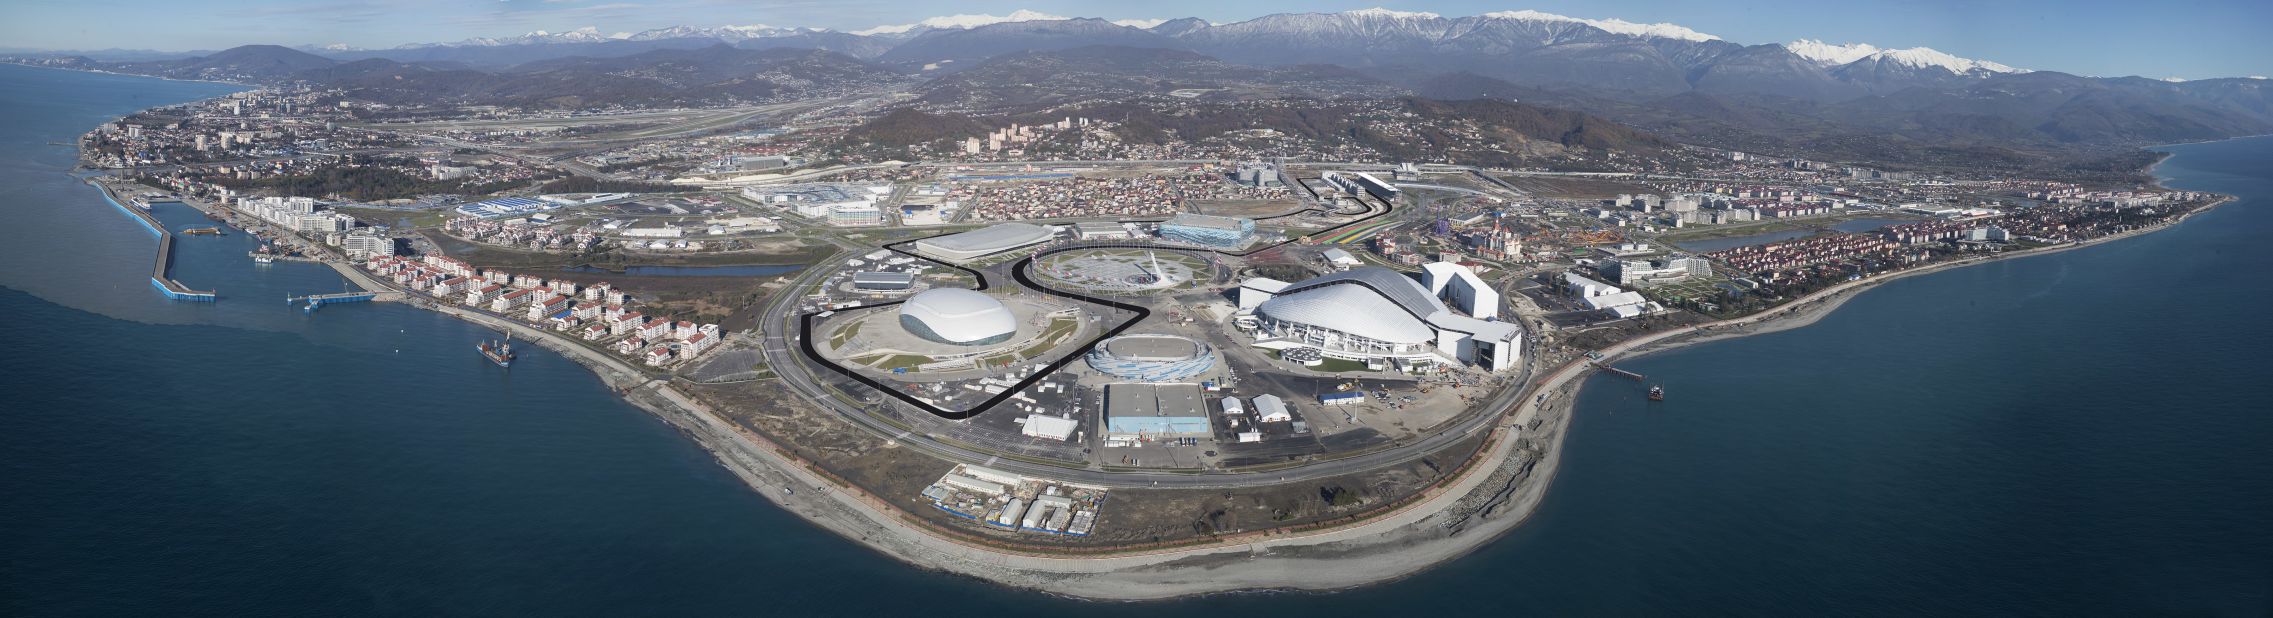 The Sochi GP will cut its way straight the middle of what is now the Olympic Park. Organizers claim its location also means it will benefit from good transport links, with the railway station, connecting roads and airport facilities currently being used to deliver spectators to the Games.